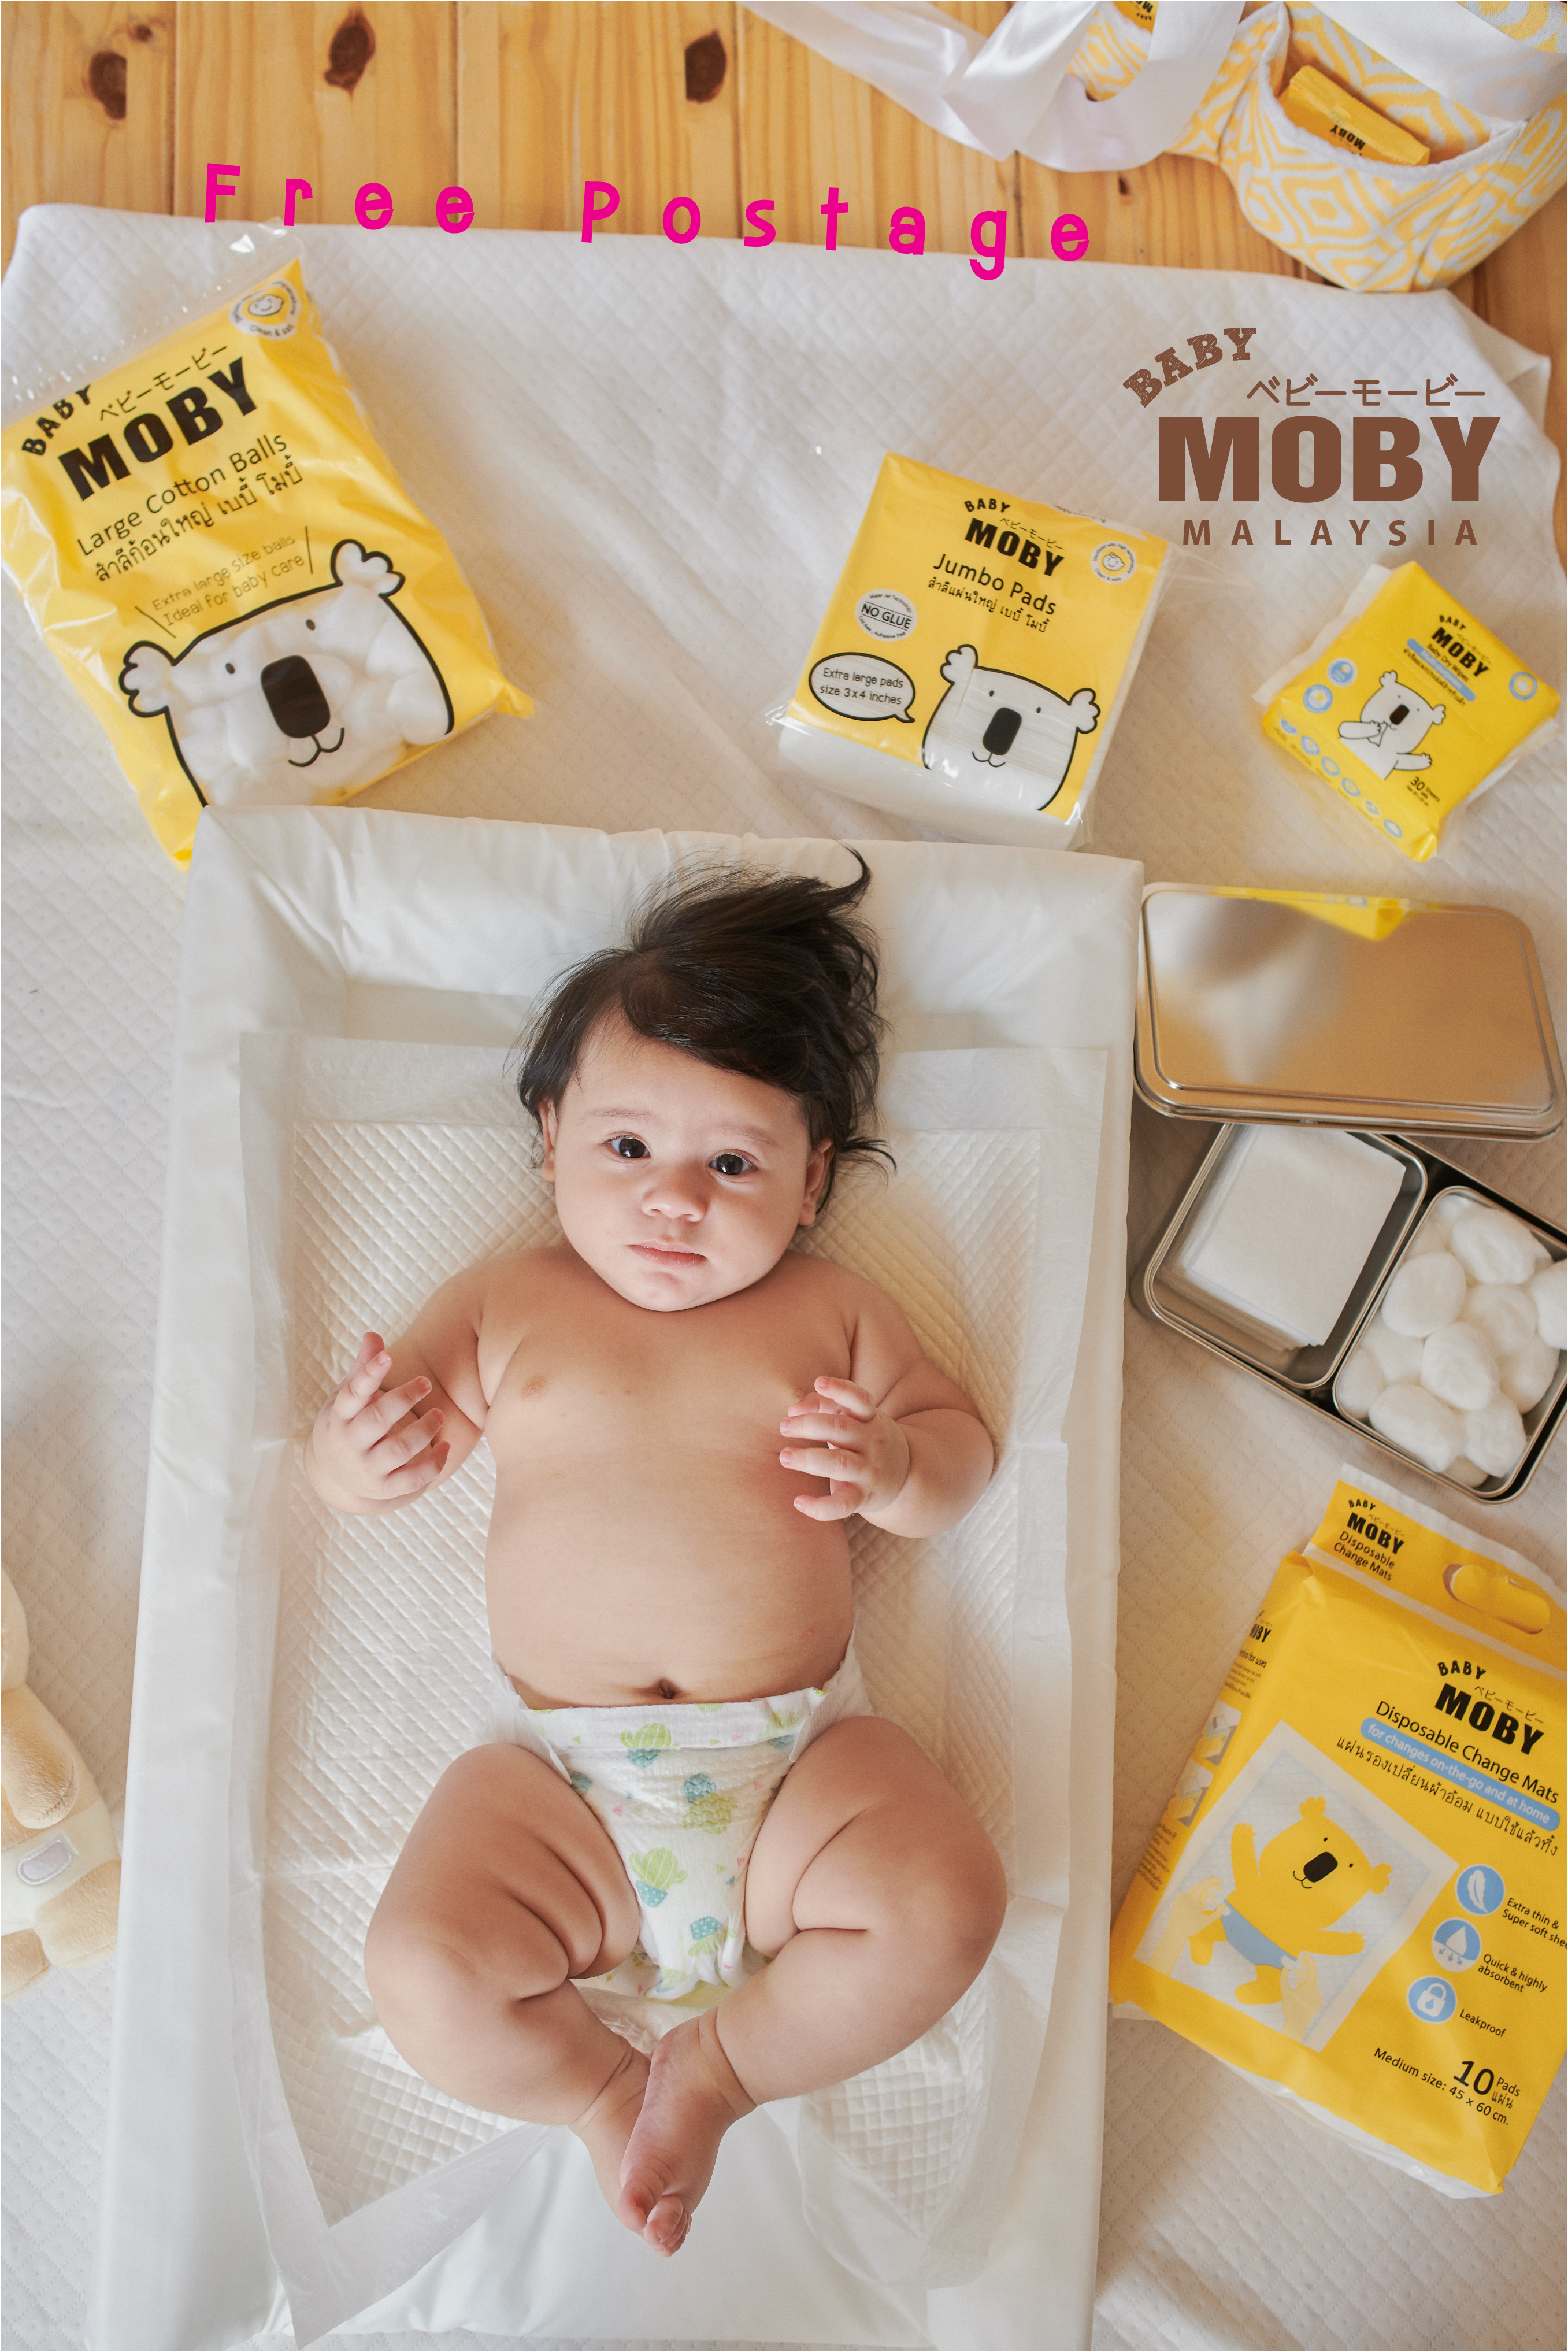 FREE POSTAGE | Baby Moby Malaysia